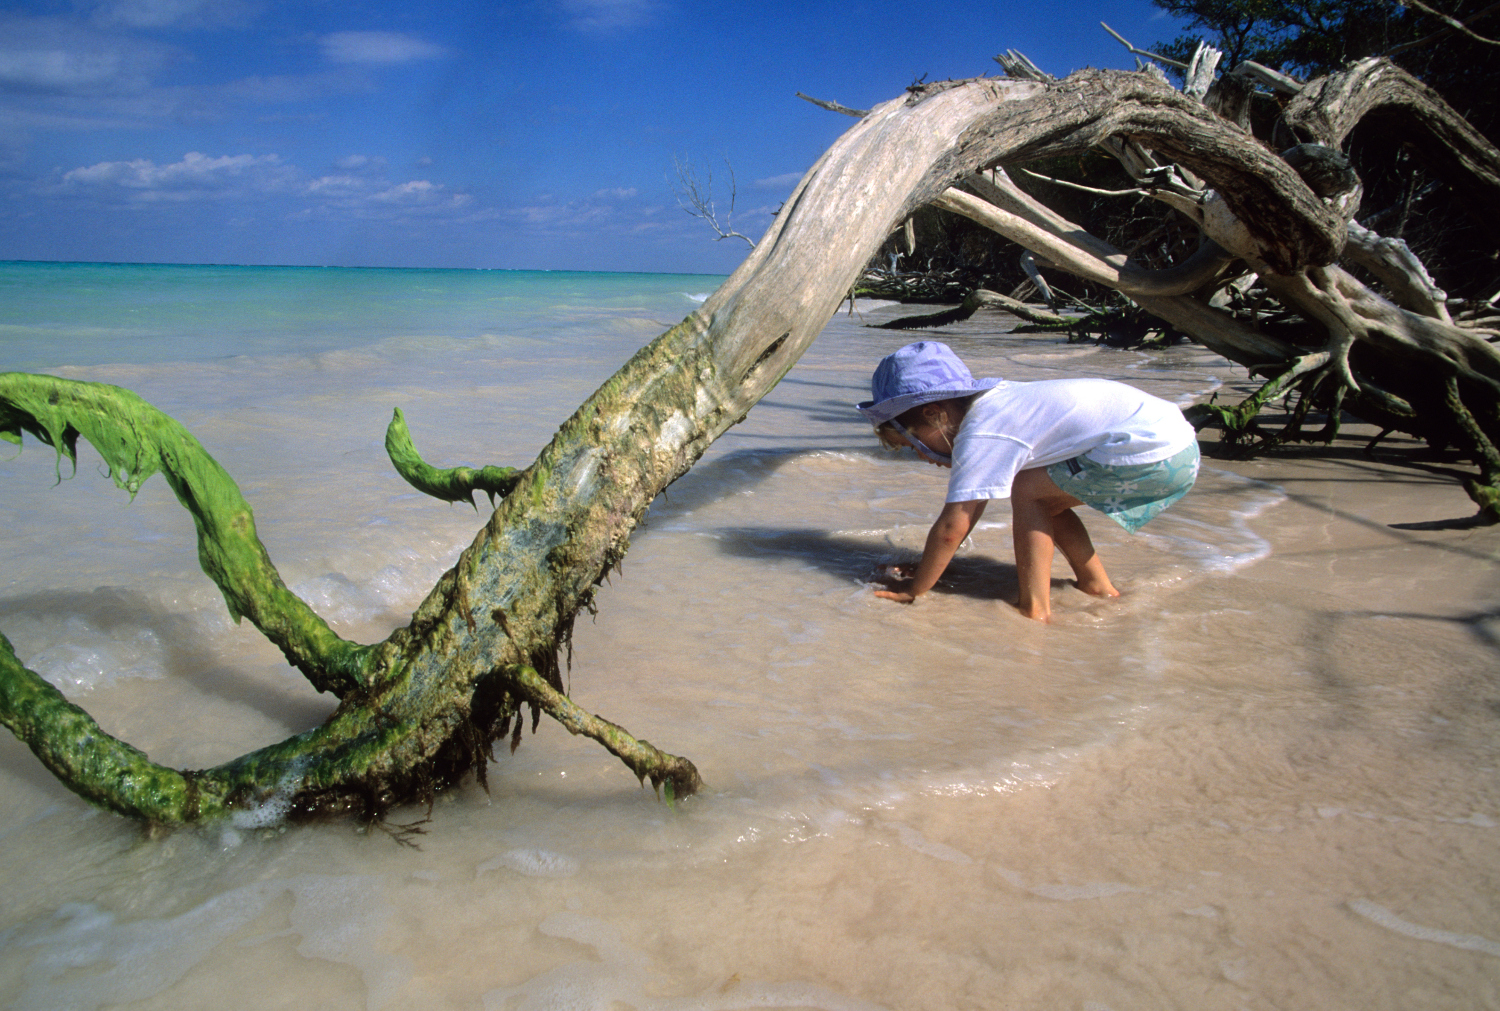 Kids love exploring at the beach, and Cuba has plenty. Image by Beth Wald / Aurora / Getty